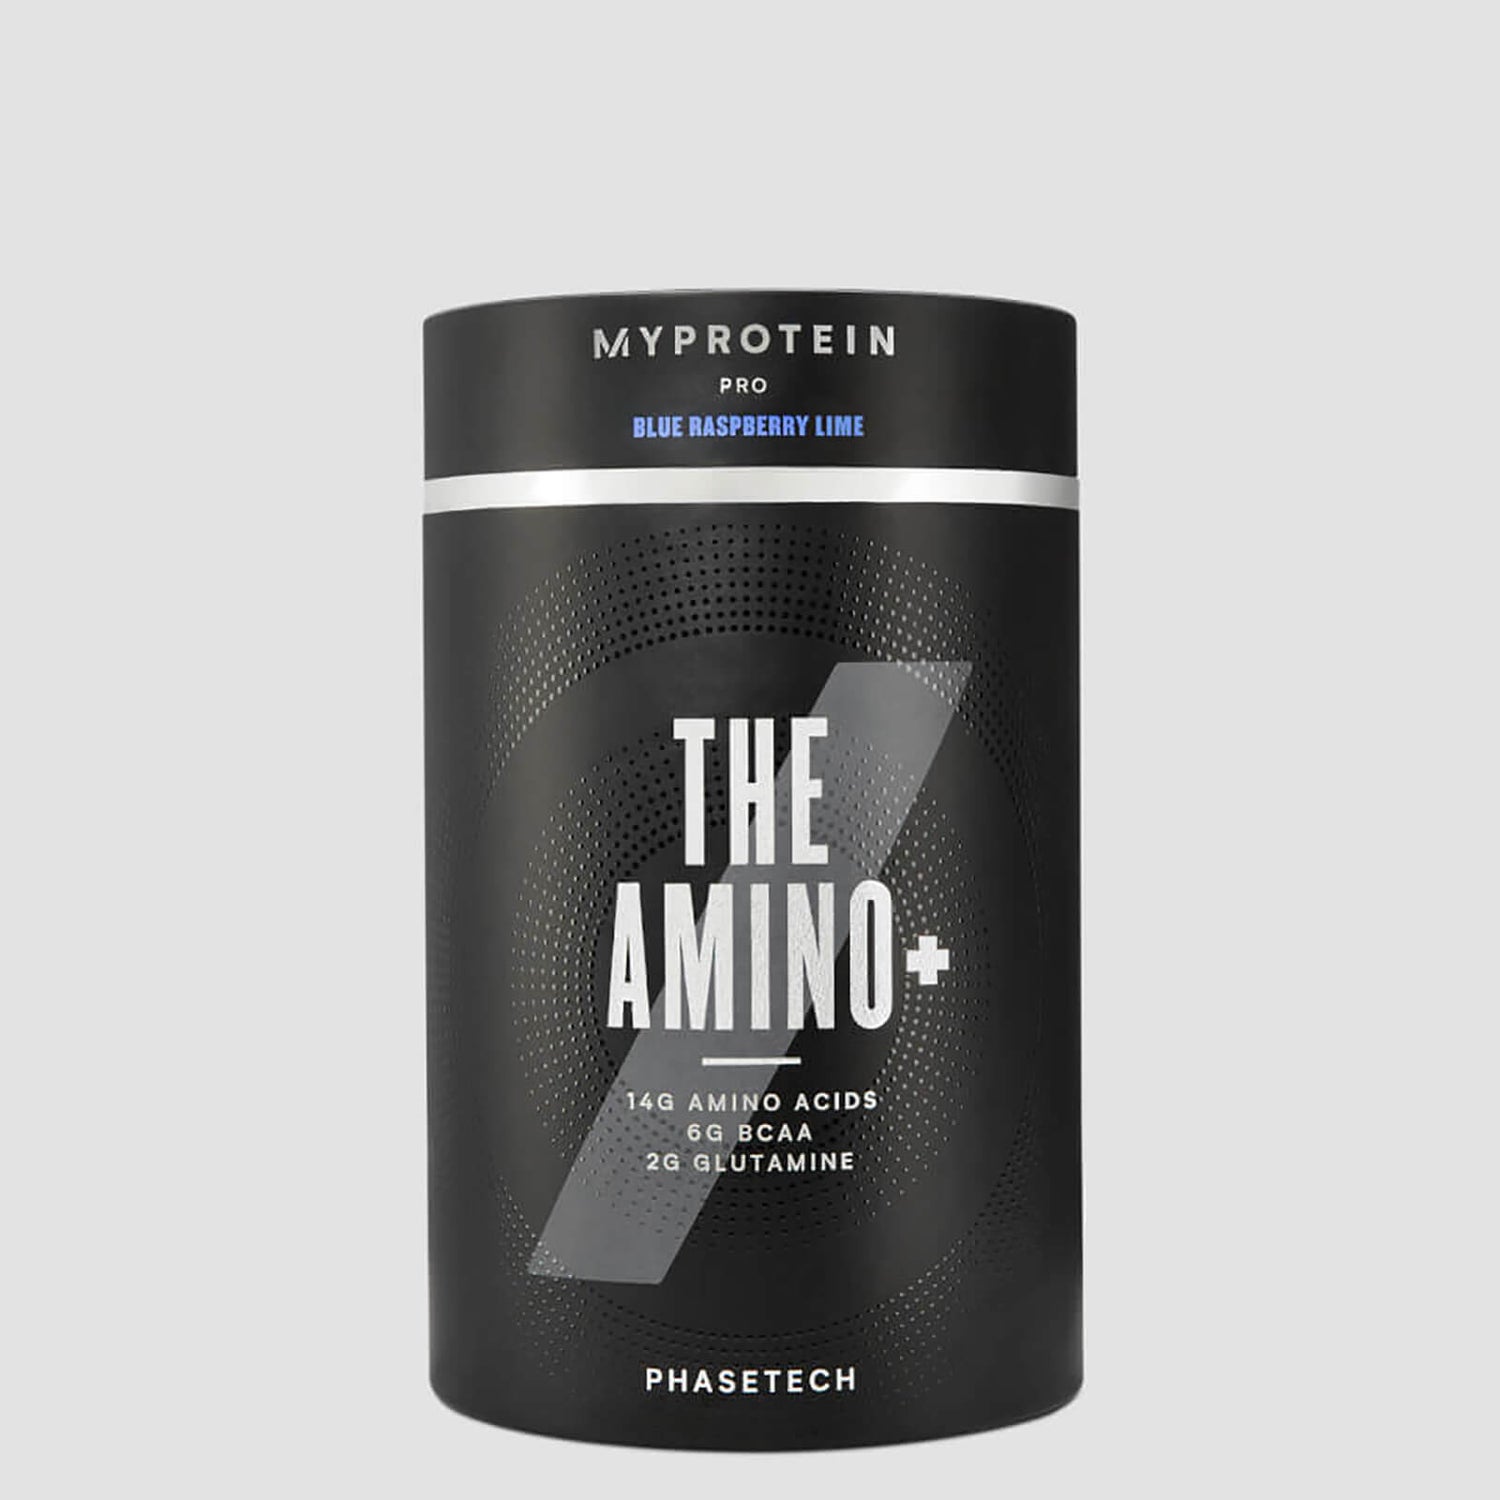 THE Amino+ with PhaseTech